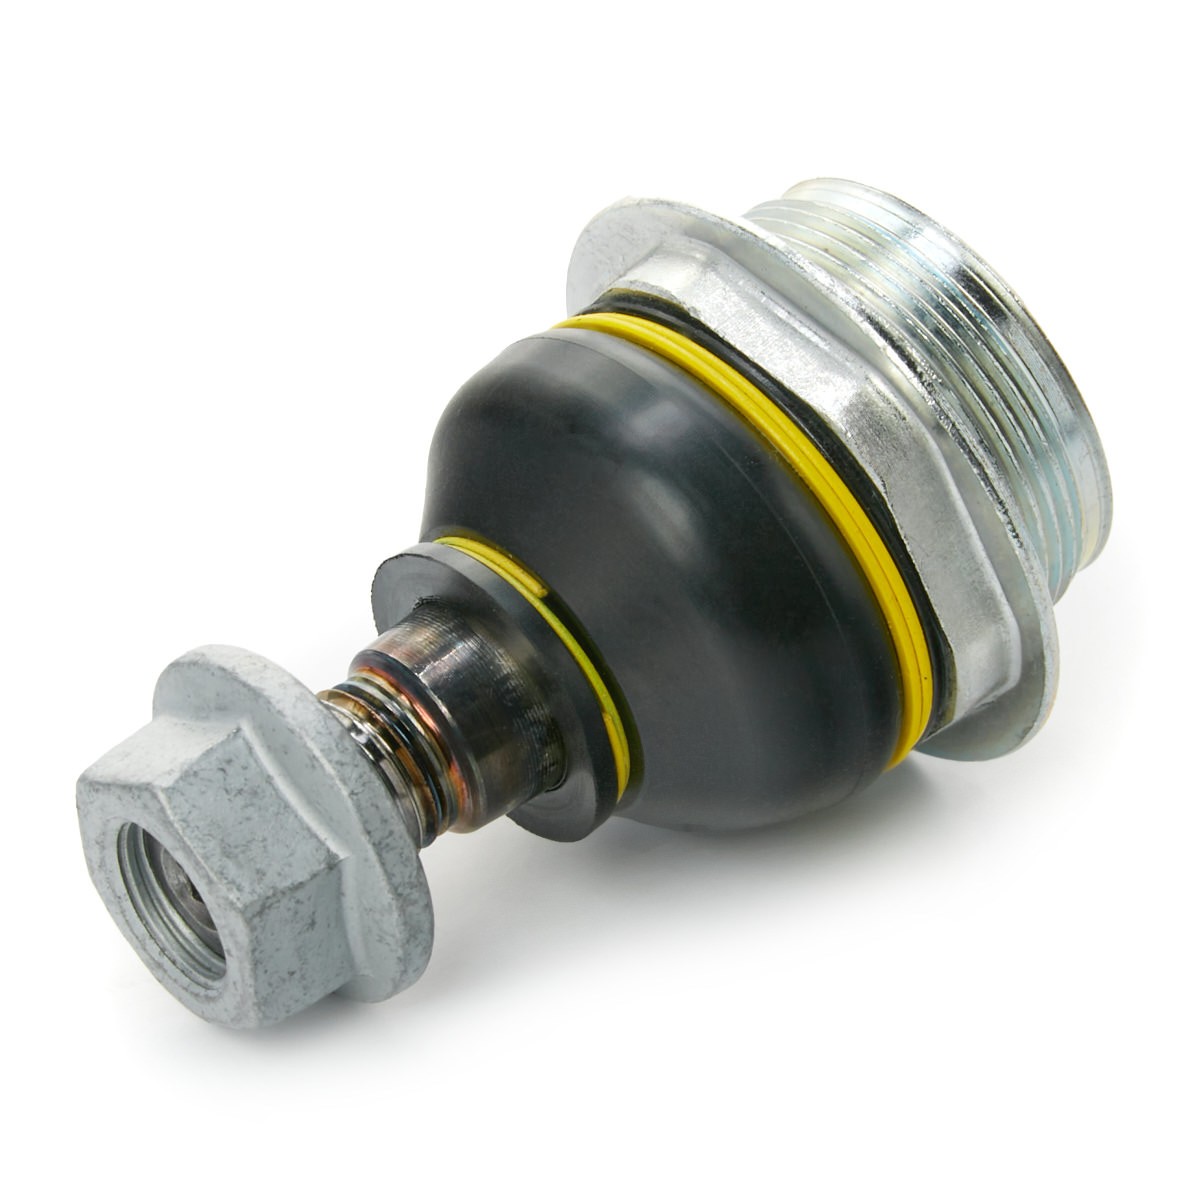 Peugeot Ball Joint MOOG PE-BJ-0837 at a good price